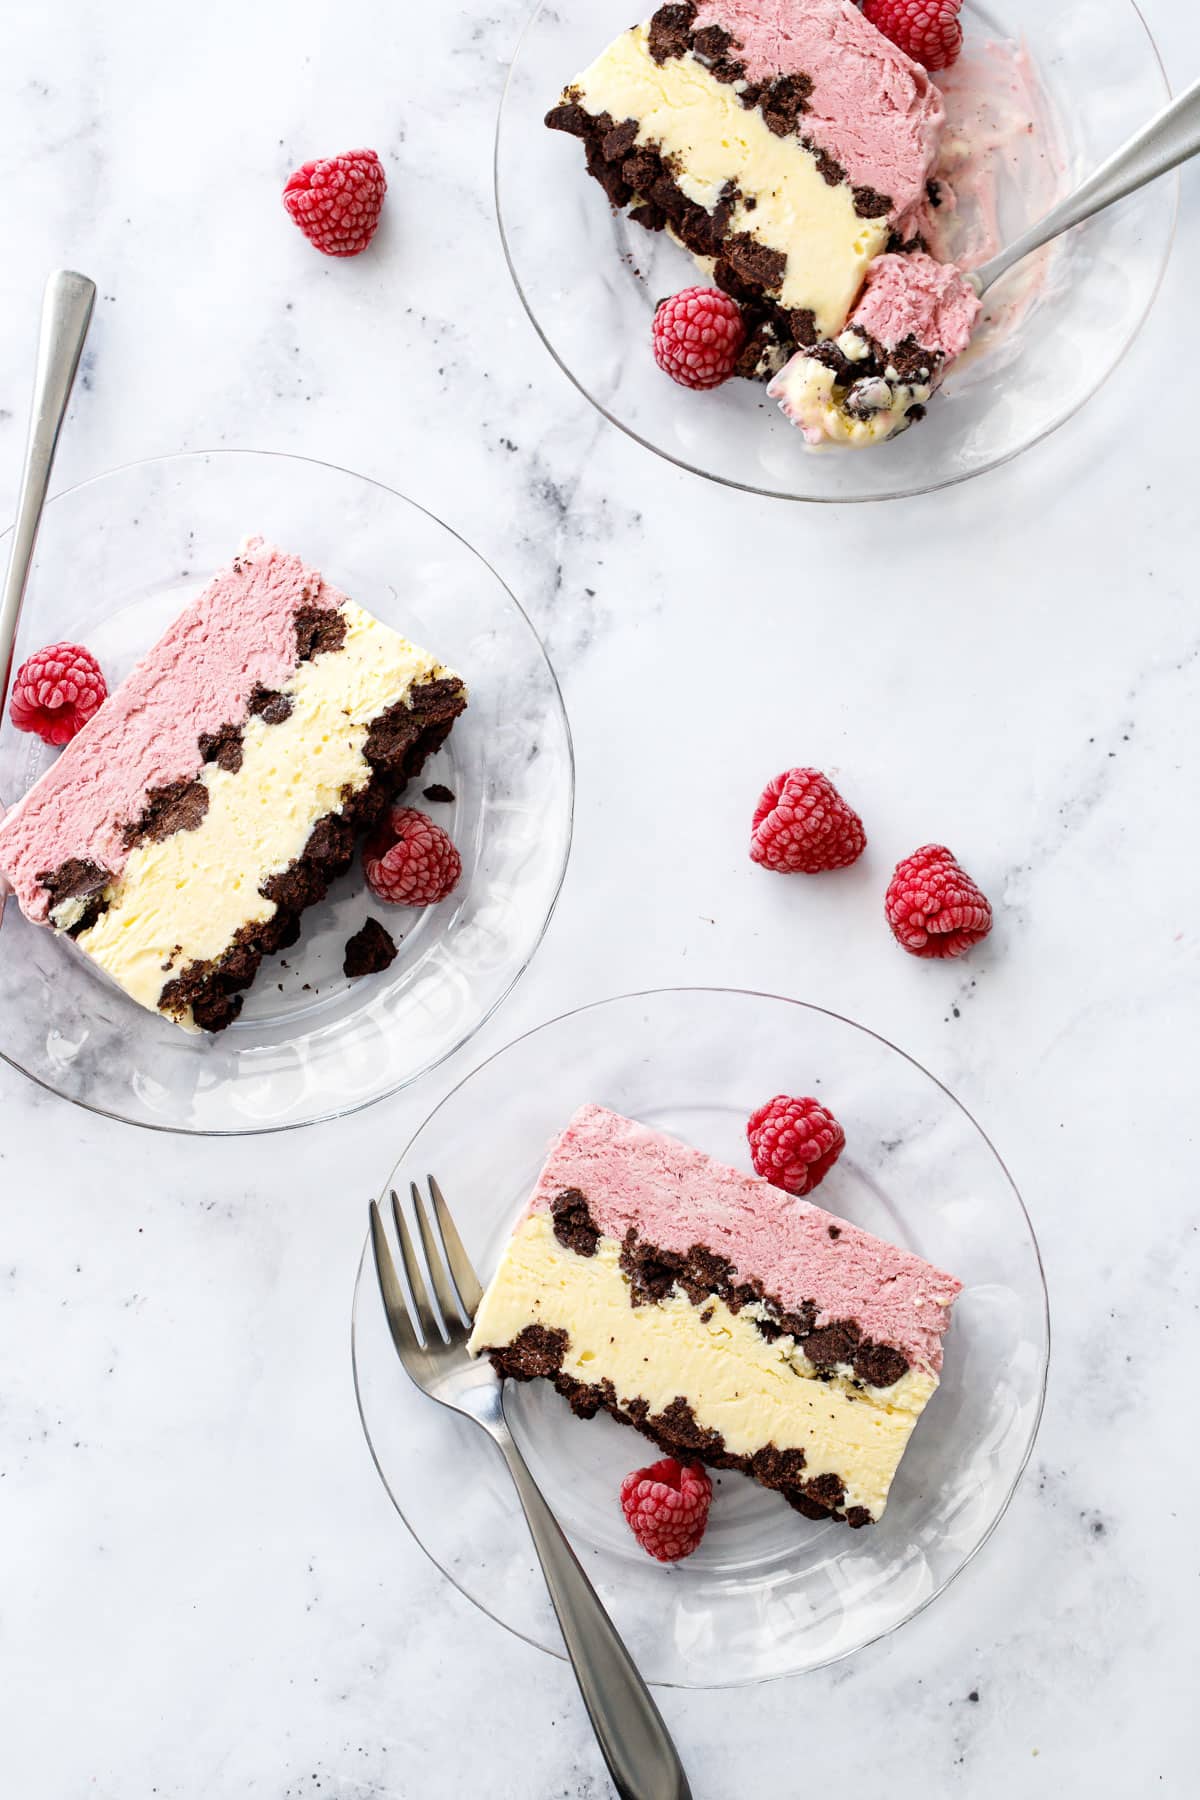 Overhead, marble background and three glass plates with cross-section slices of Raspberry & Passionfruit Semifreddo with Chocolate Crumbs, and a few frozen raspberries scattered around.